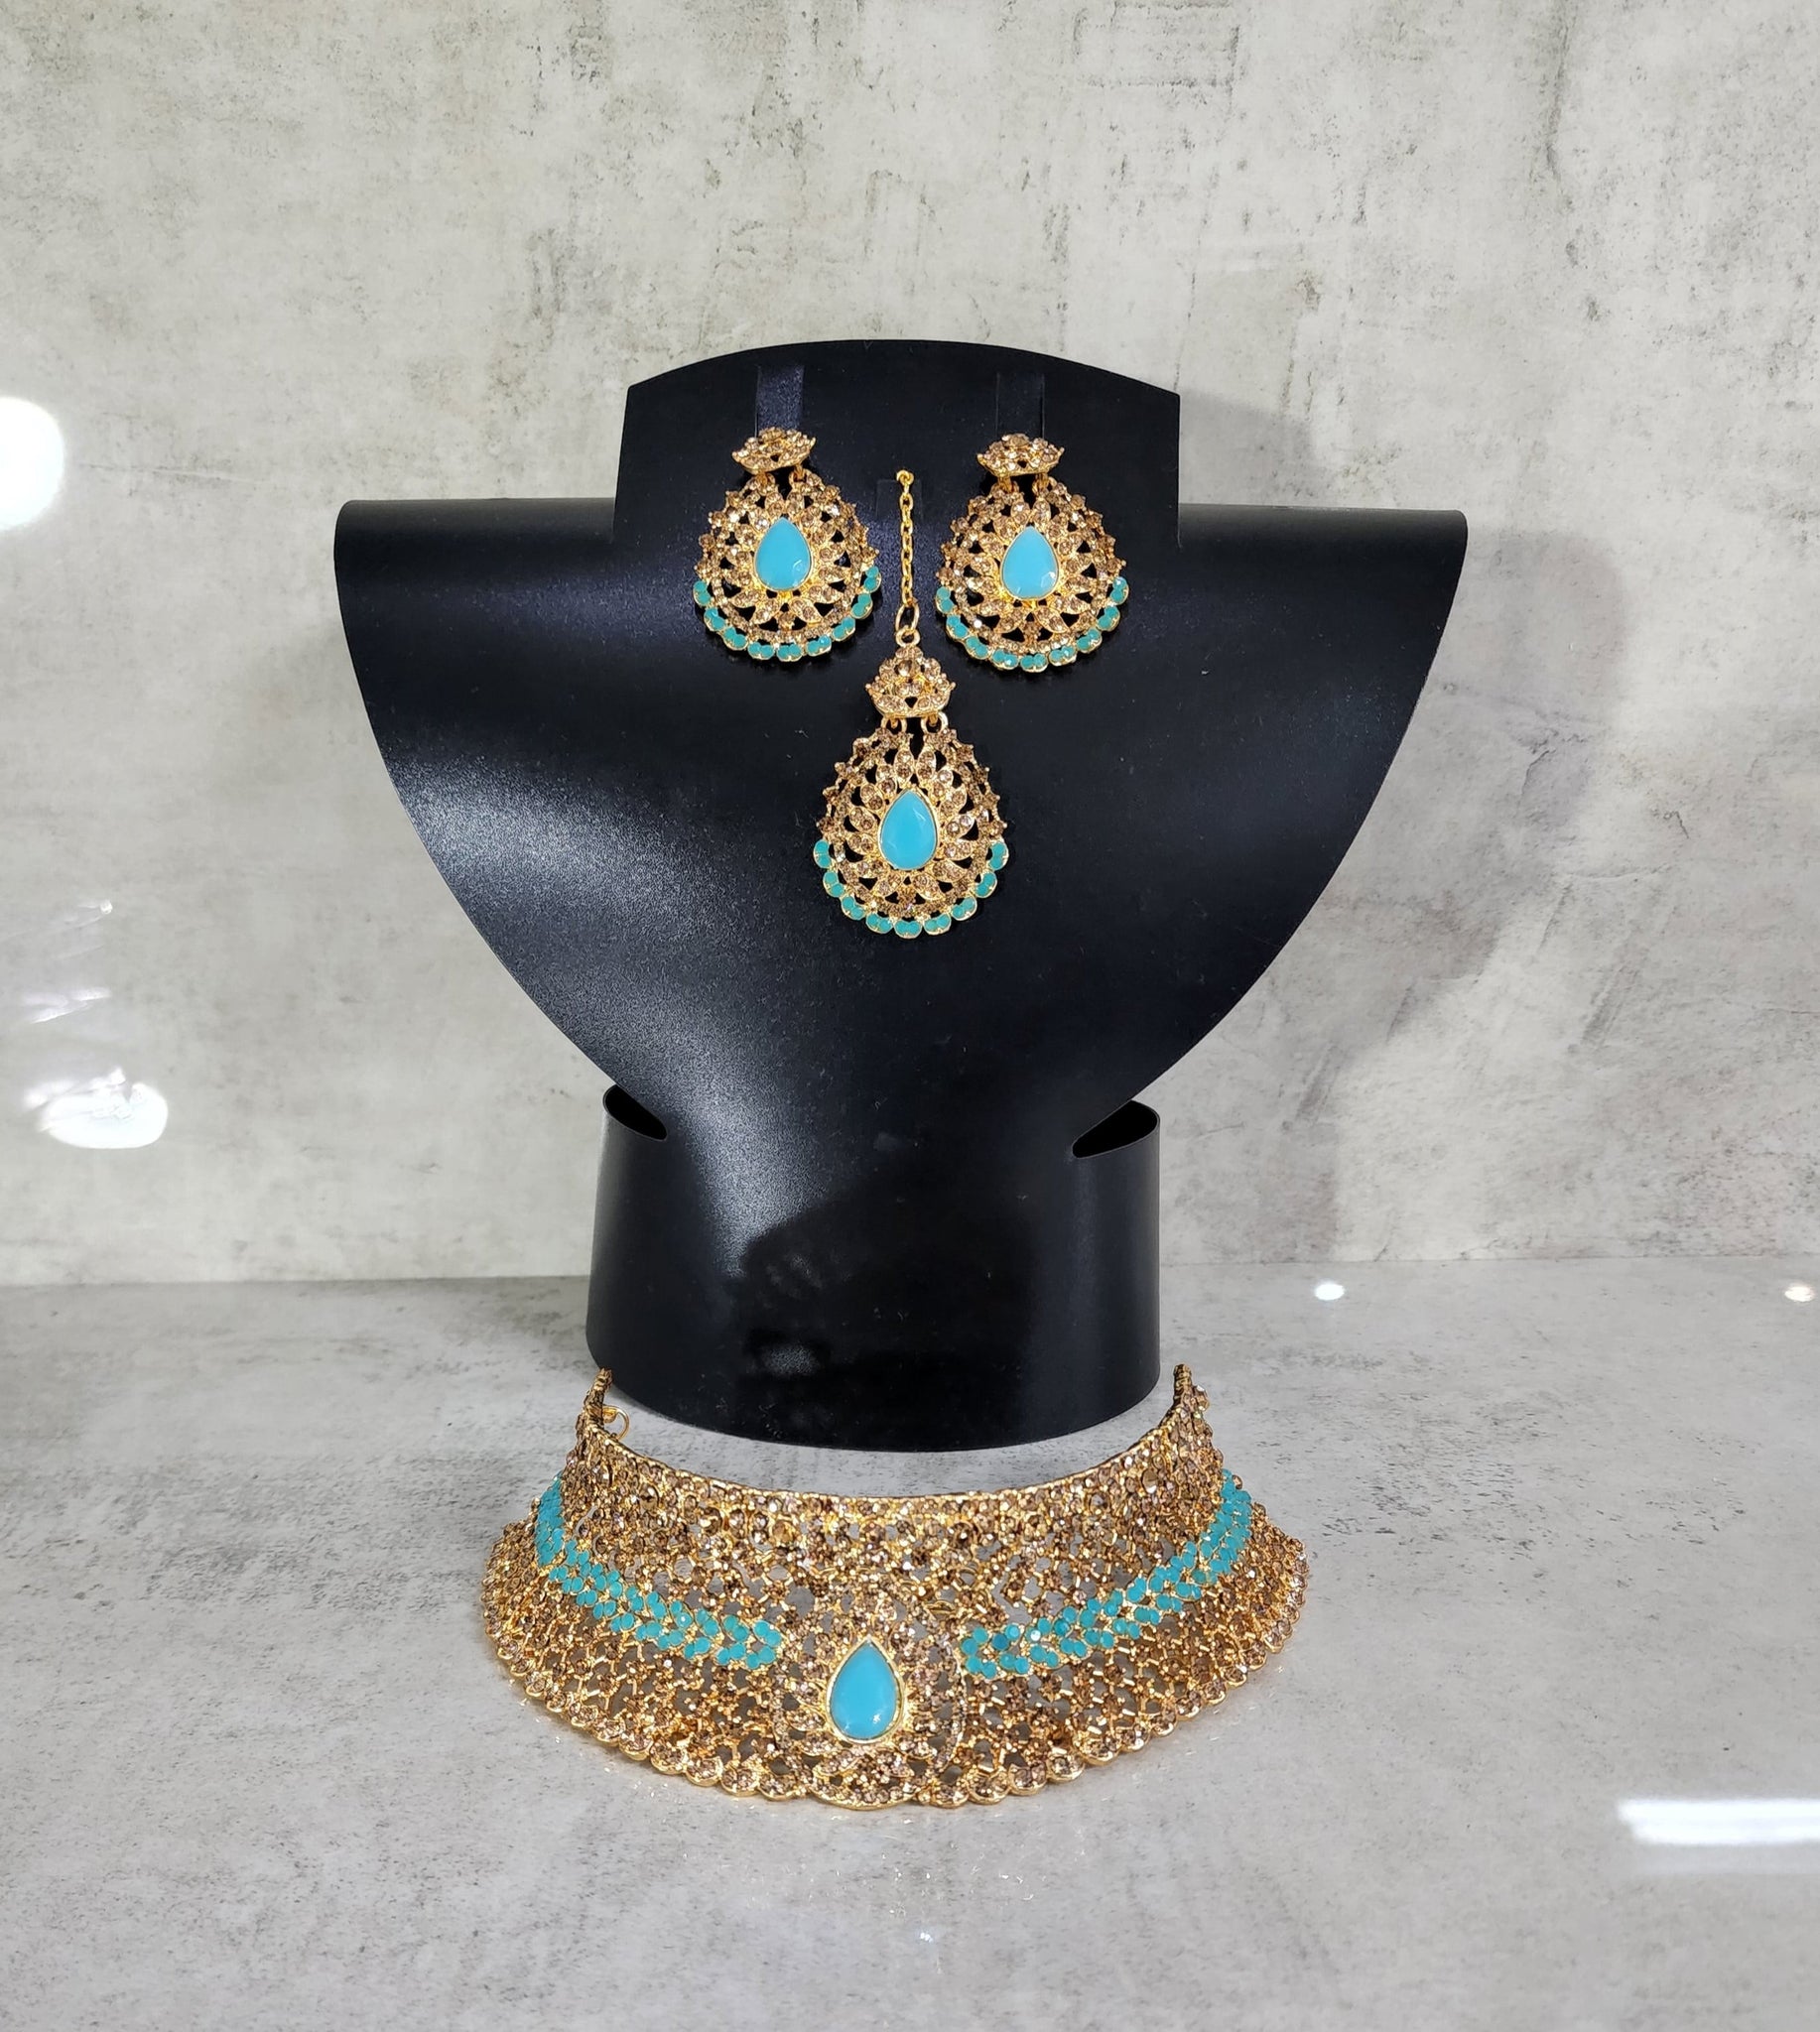 Turquoise and Gold Choker Jewellery Set